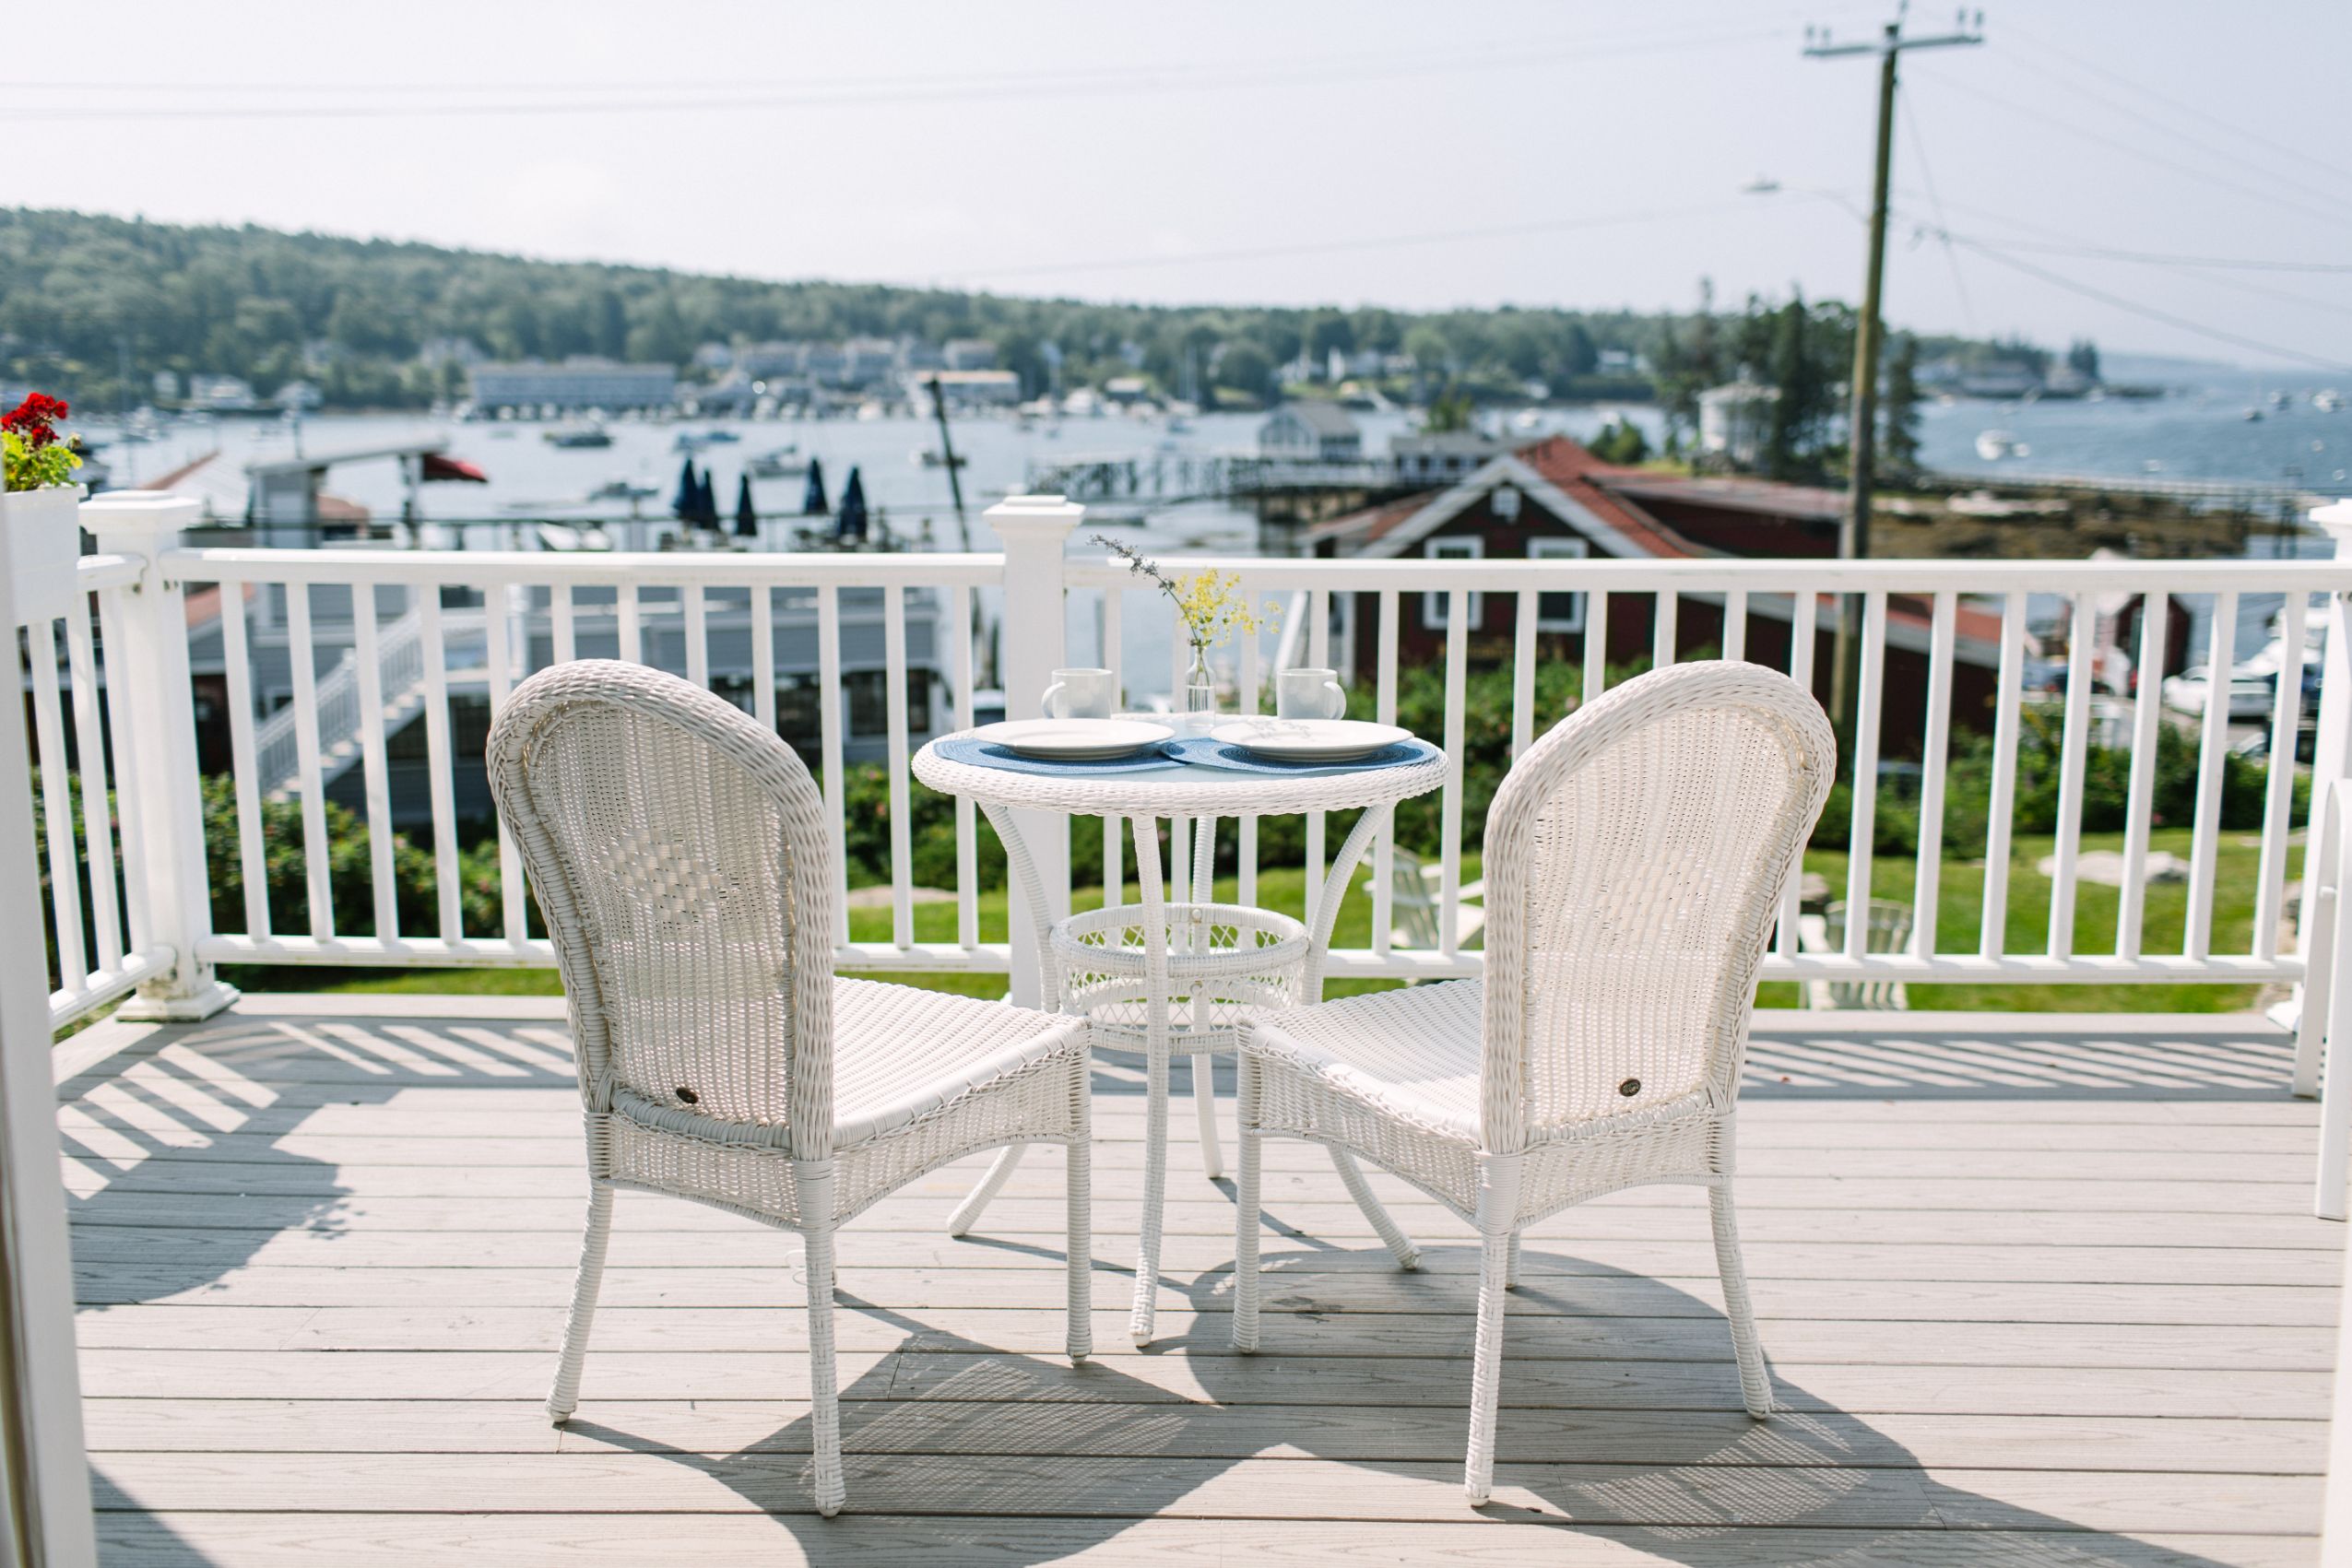 places-to-stay-in-boothbay-harbor-maine-greenleaf-inn